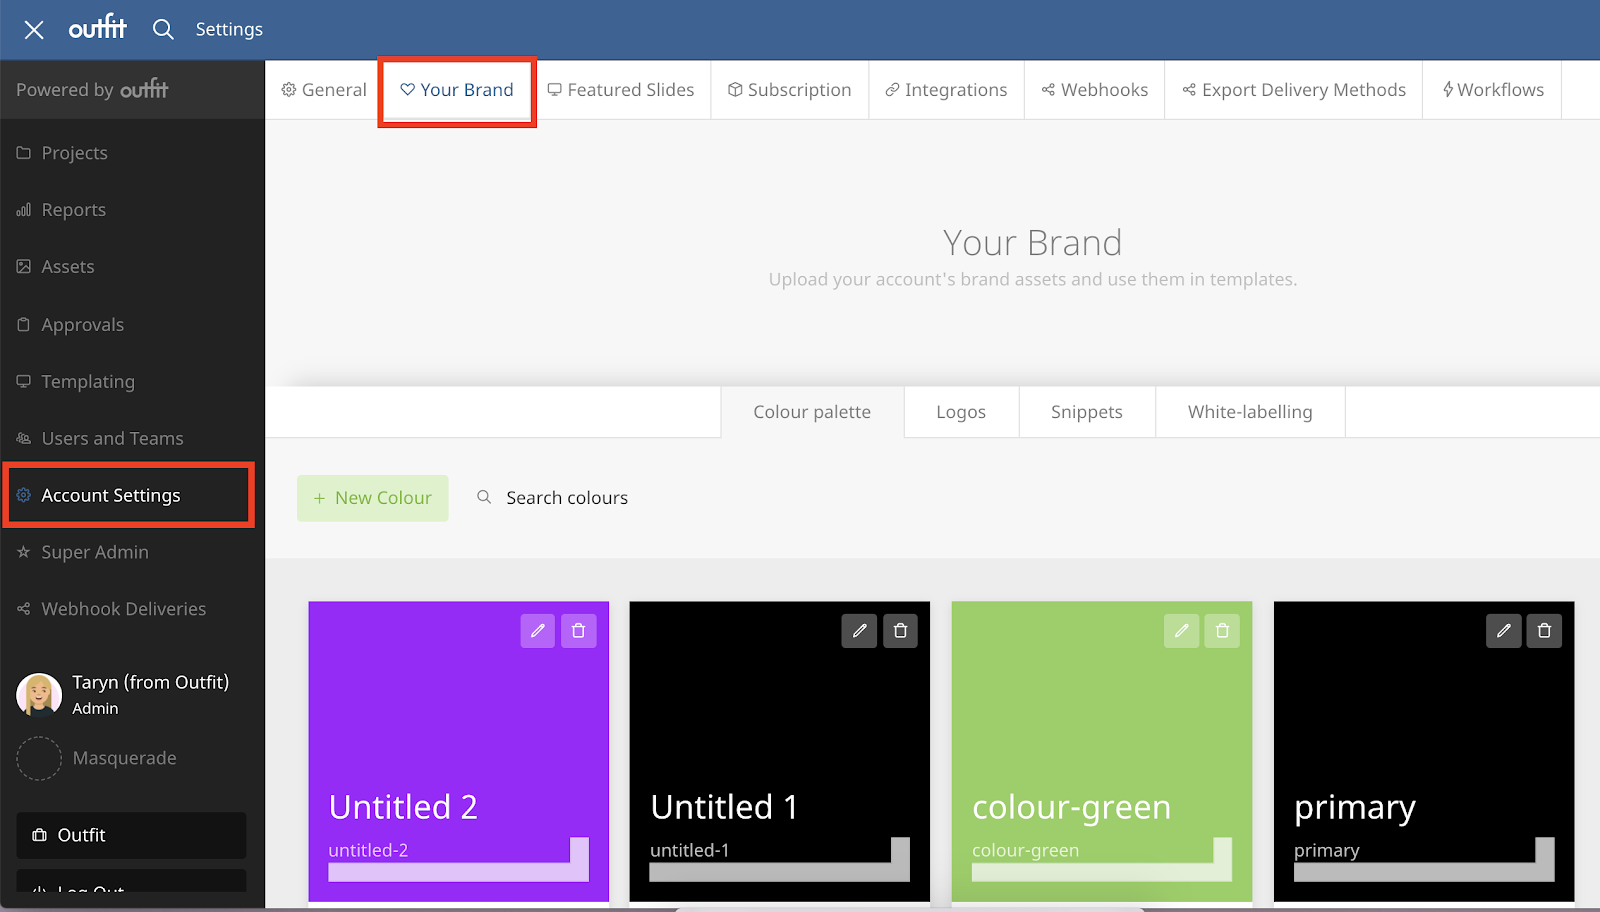 This images shows how to navigate to your brand in your account settings.